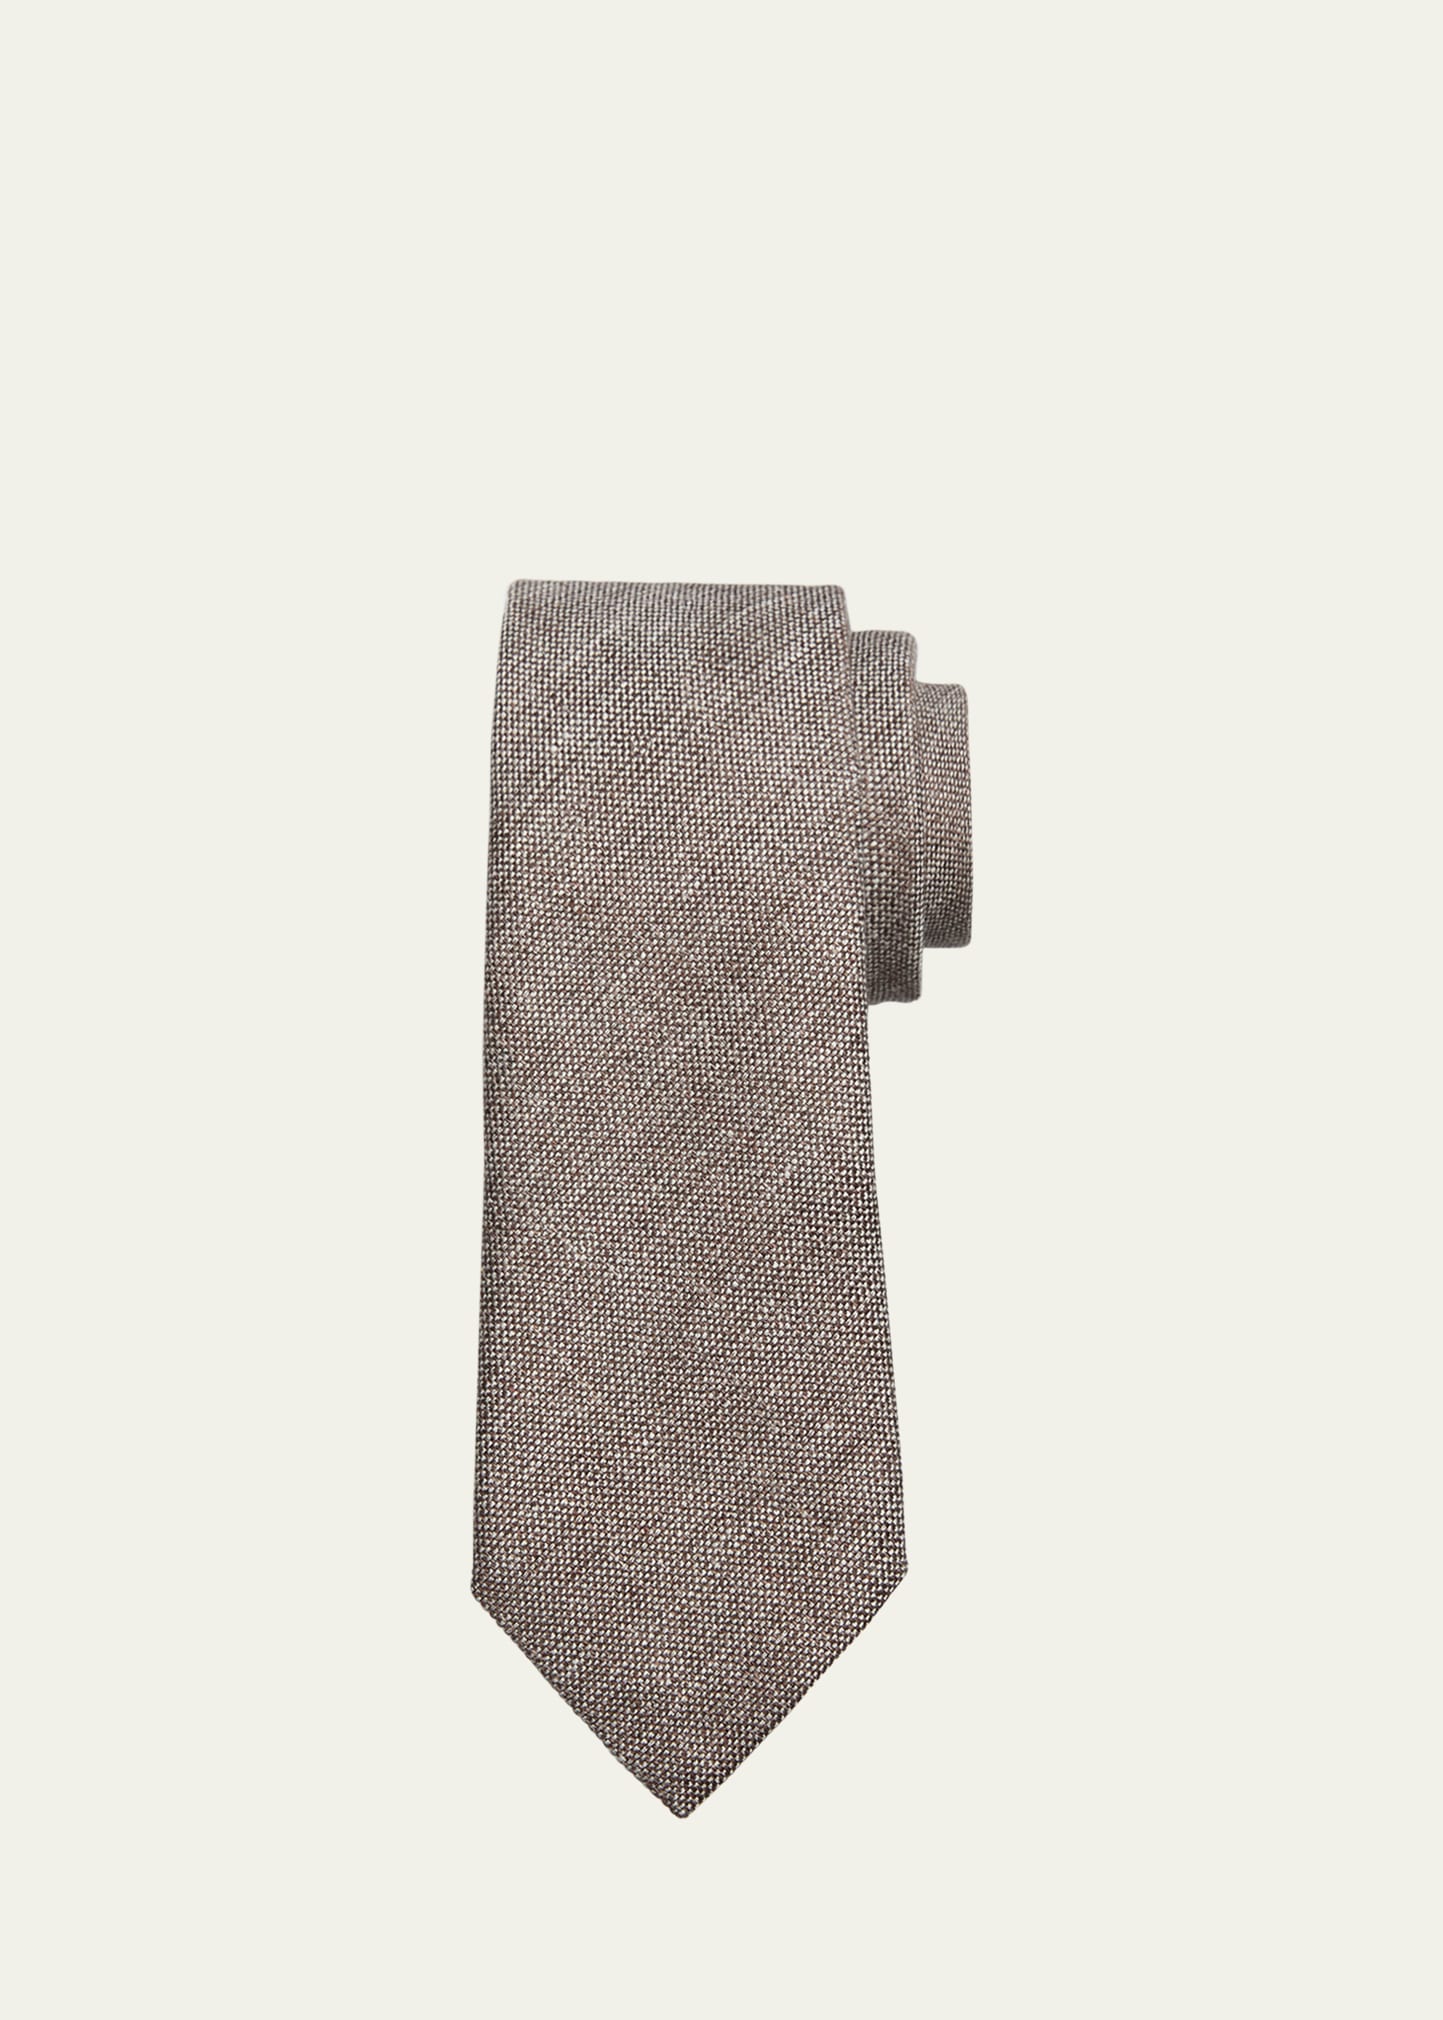 Zegna Men's Linen And Silk Jacquard Tie In Md Brw Sld